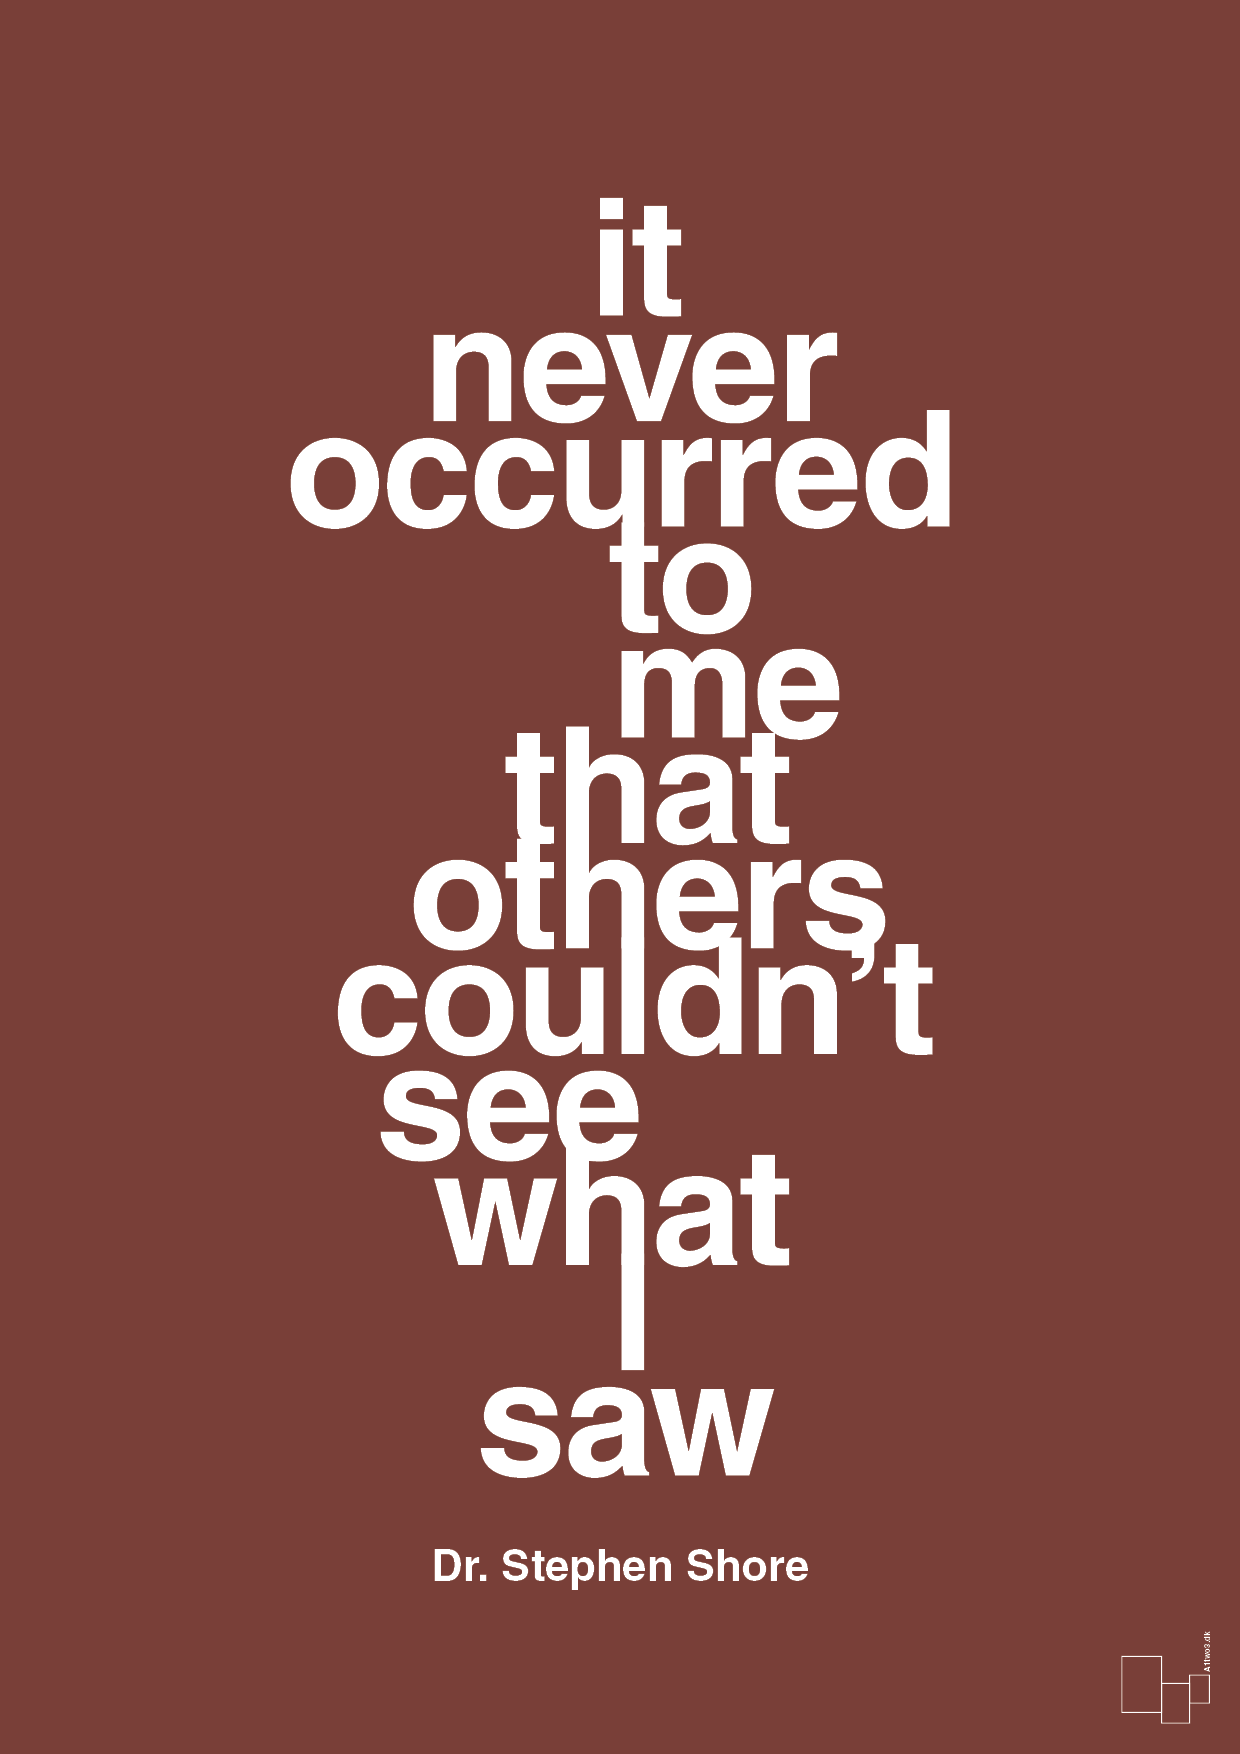 it never occurred to me that others couldn’t see what I saw - Plakat med Samfund i Red Pepper